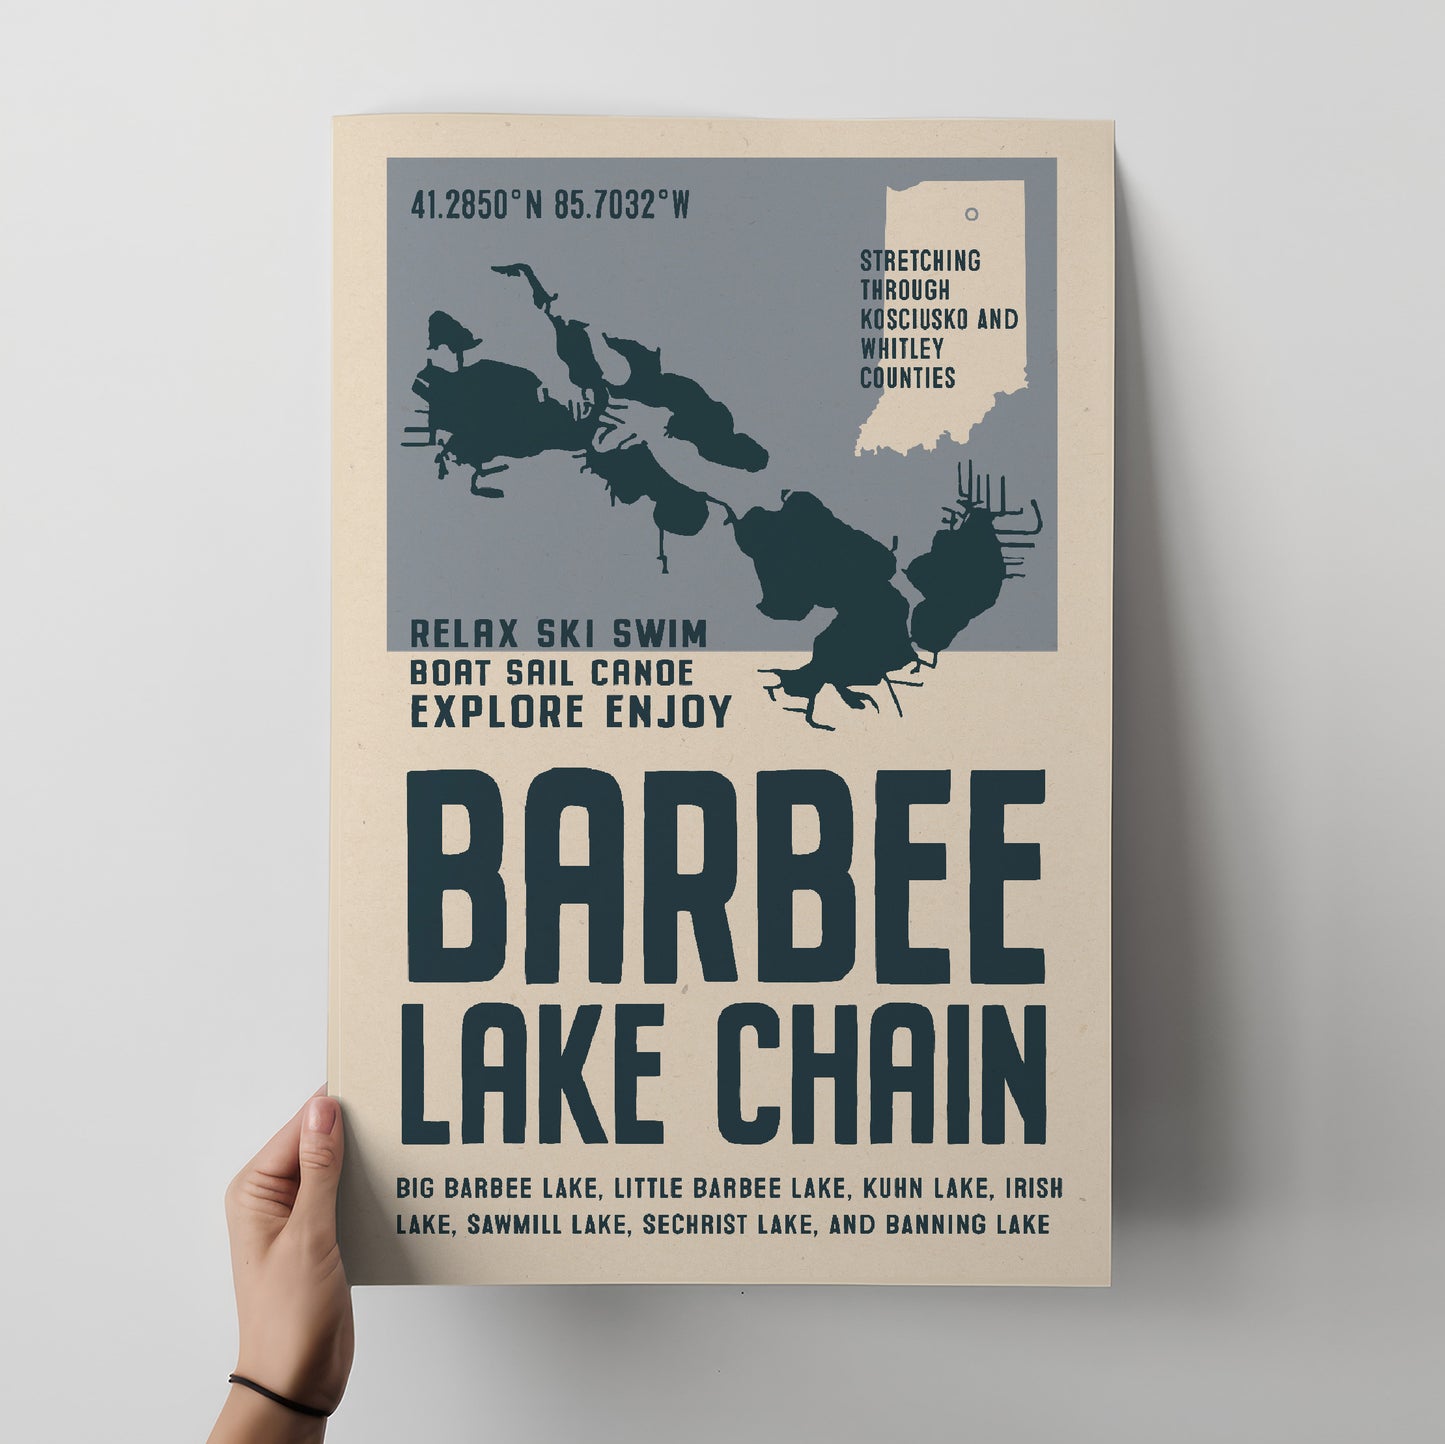 Barbee Lake Chain Travel Poster